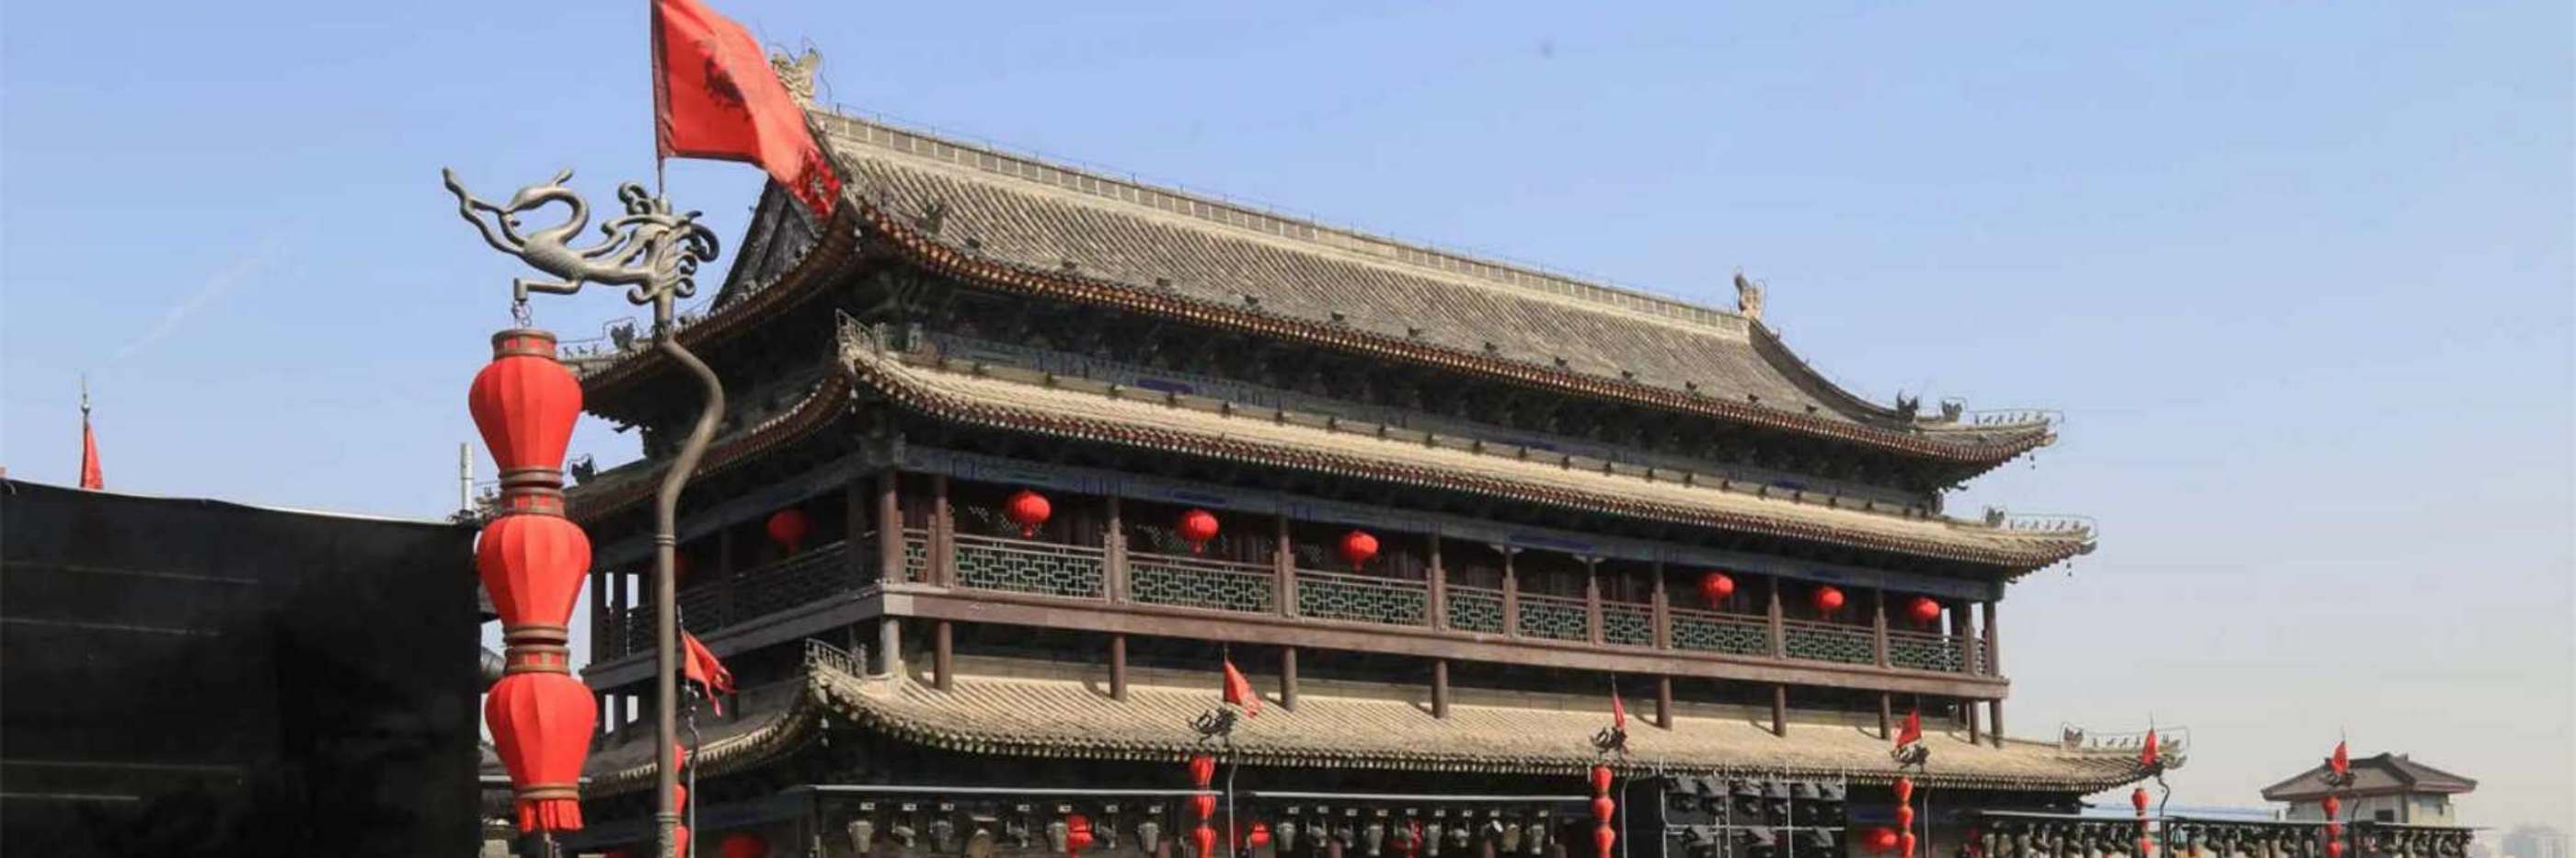 Xi’an Attractions